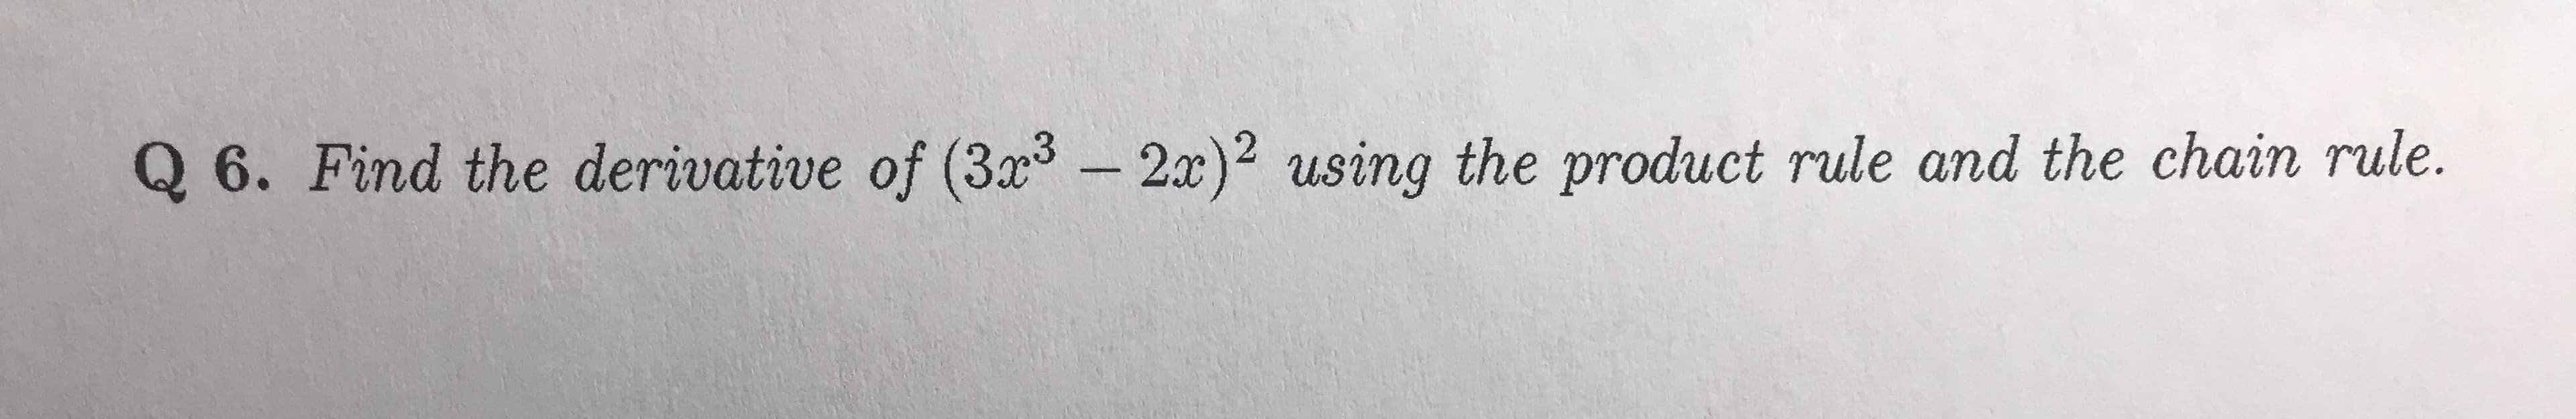 Q 6. Find the derivative of (3x2-2x)2 using the product rule and the chain rule.
